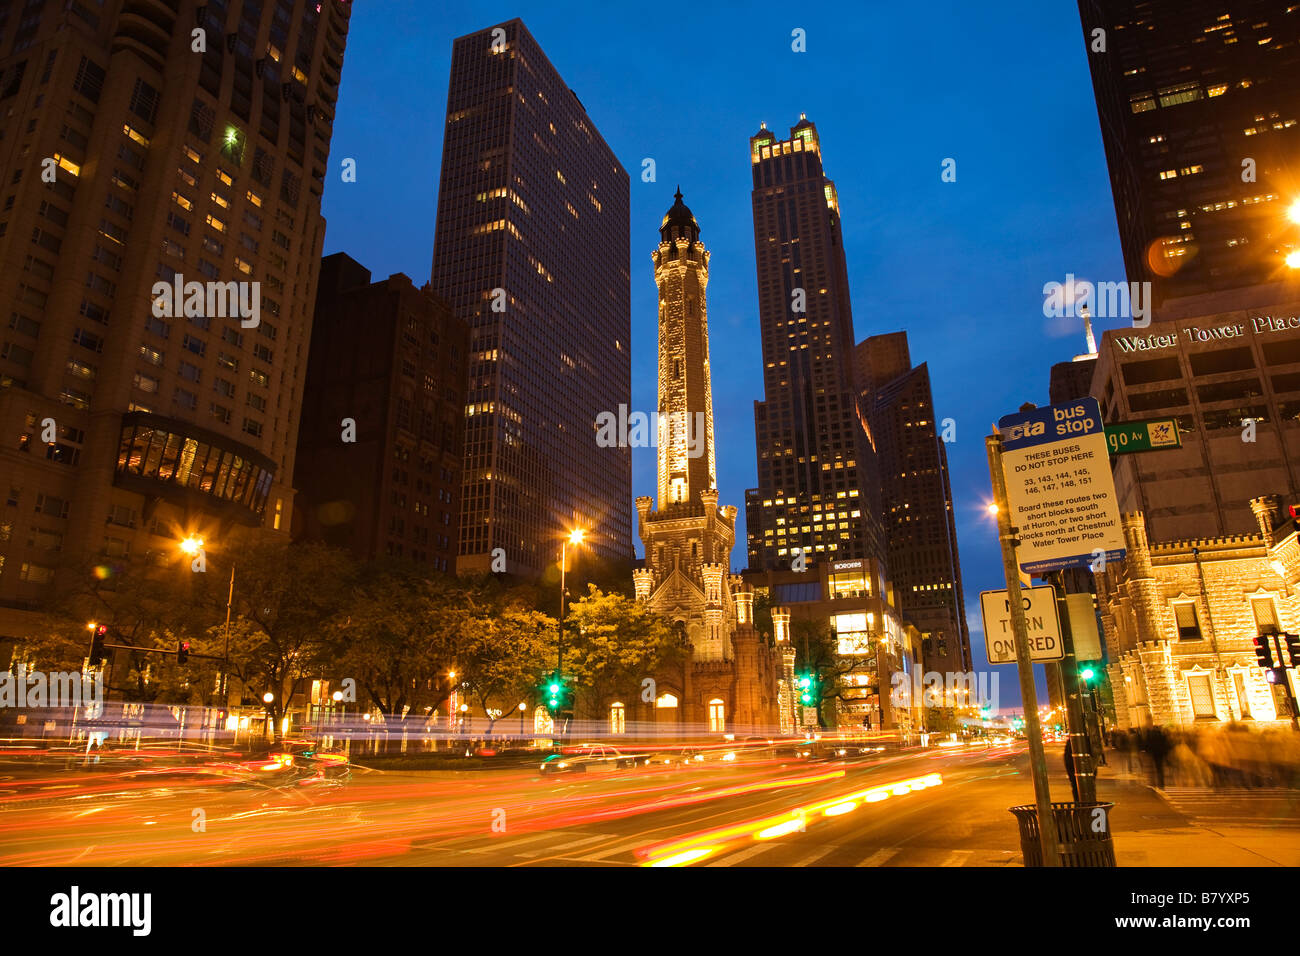 ILLINOIS Chicago Water Tower building on Michigan Avenue at dusk CTA bus stop sign Water Tower Place Stock Photo